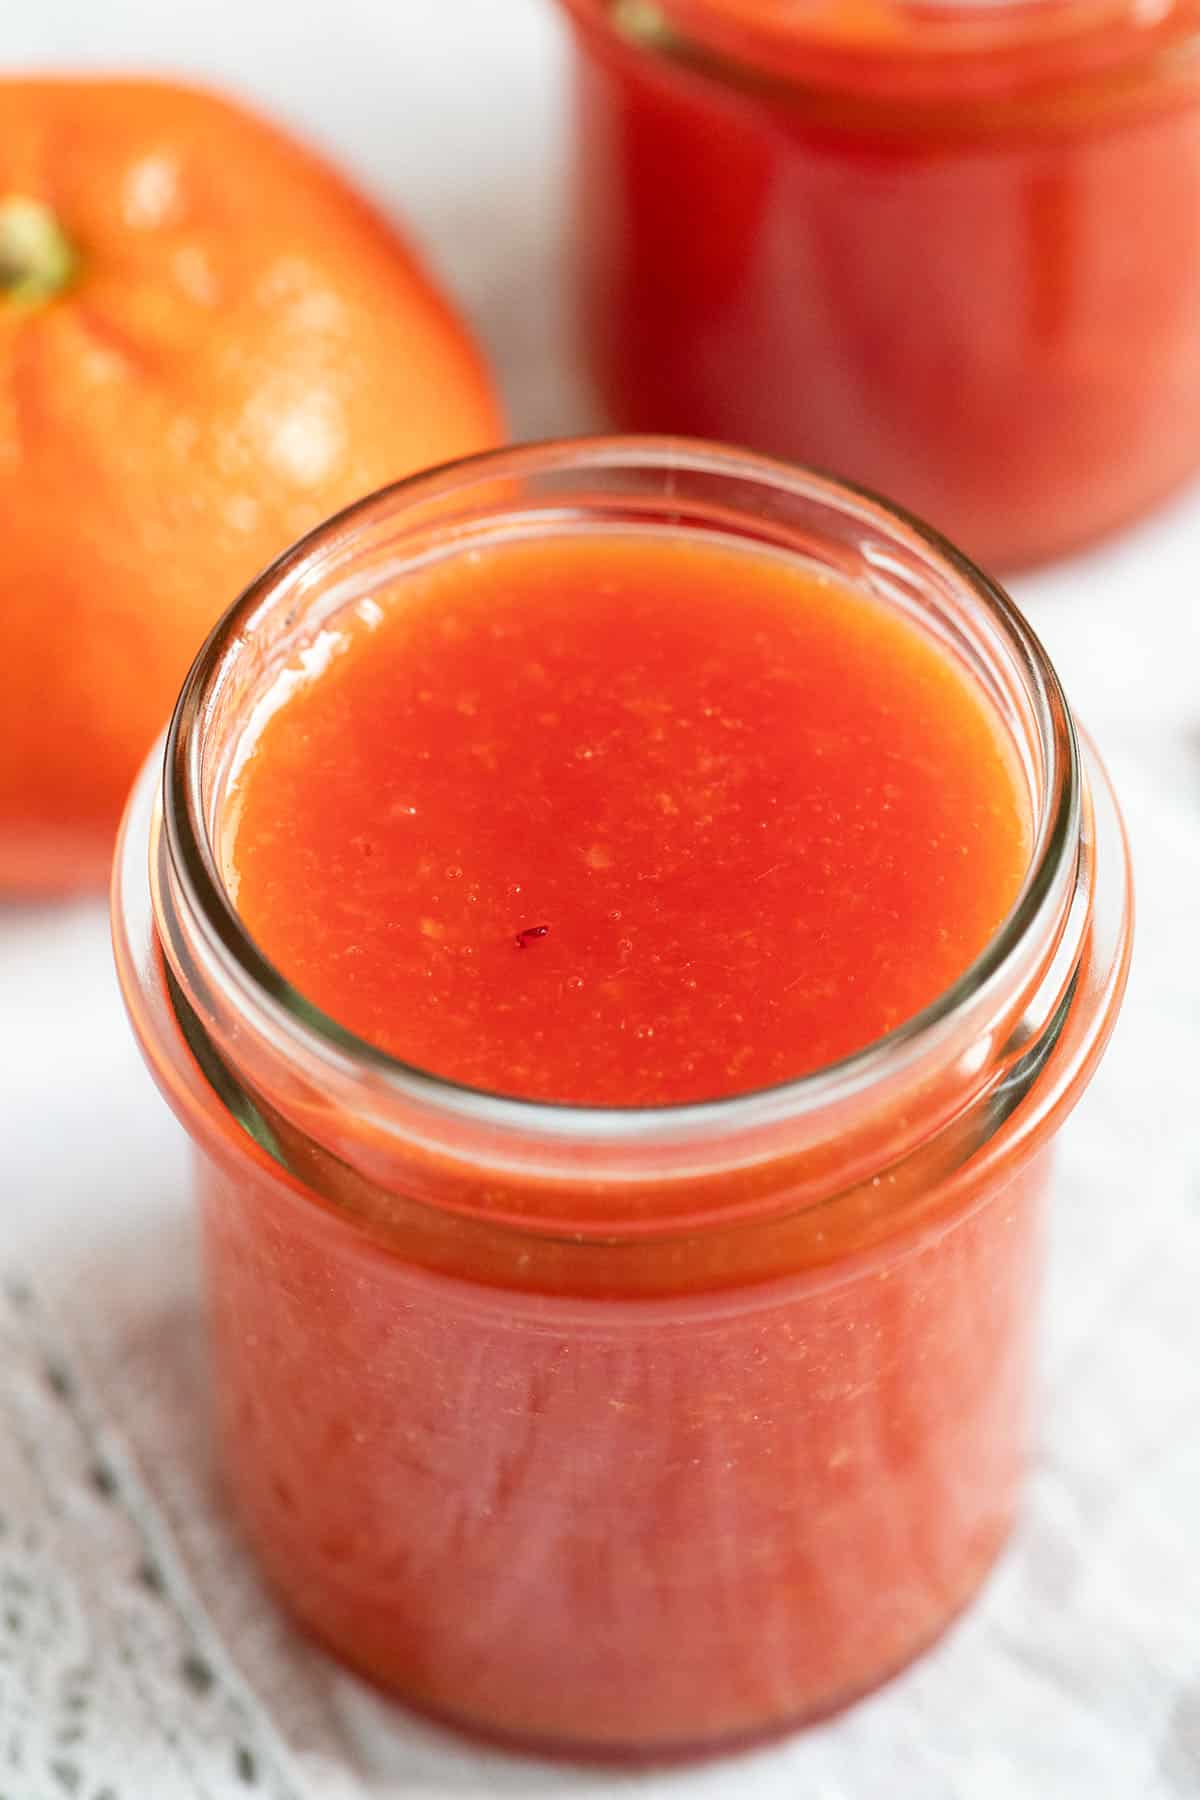 jam made with oranges and lemon juice in a small jar.